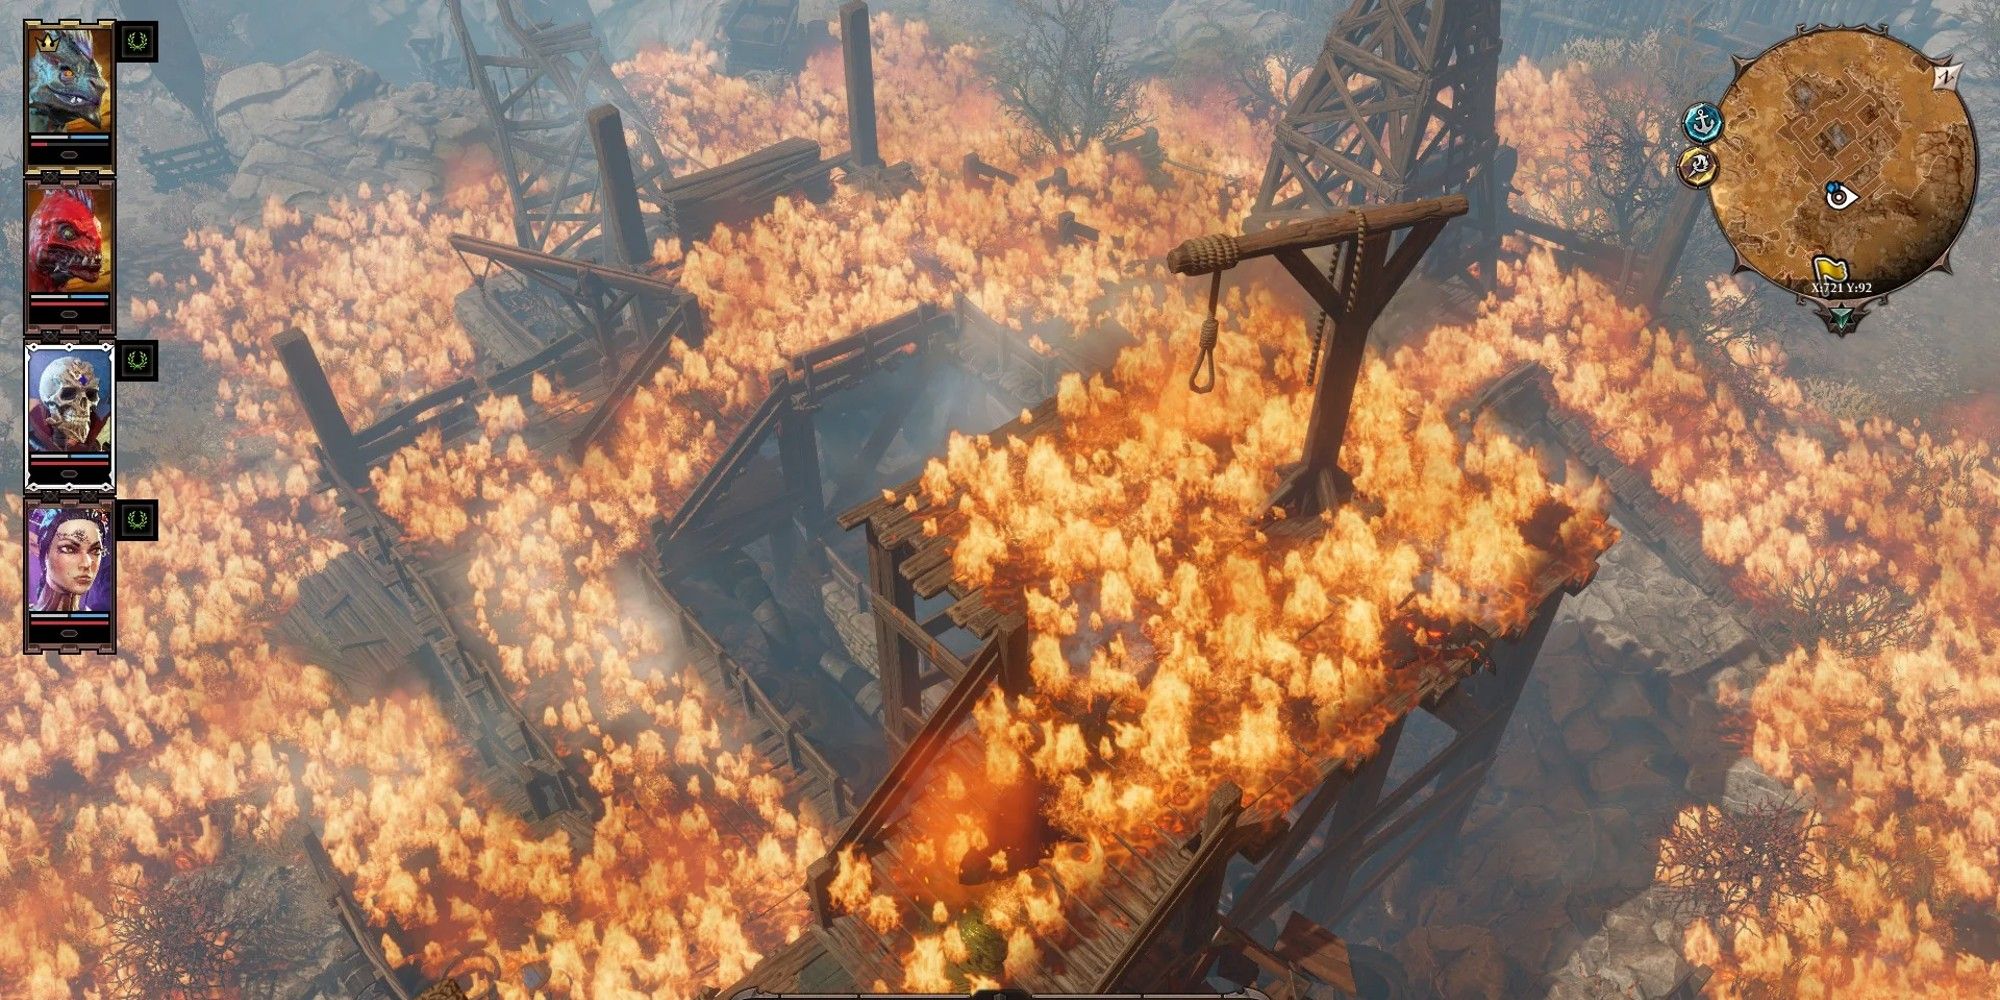 Divinity 2 fire covered battlefield near oil rig